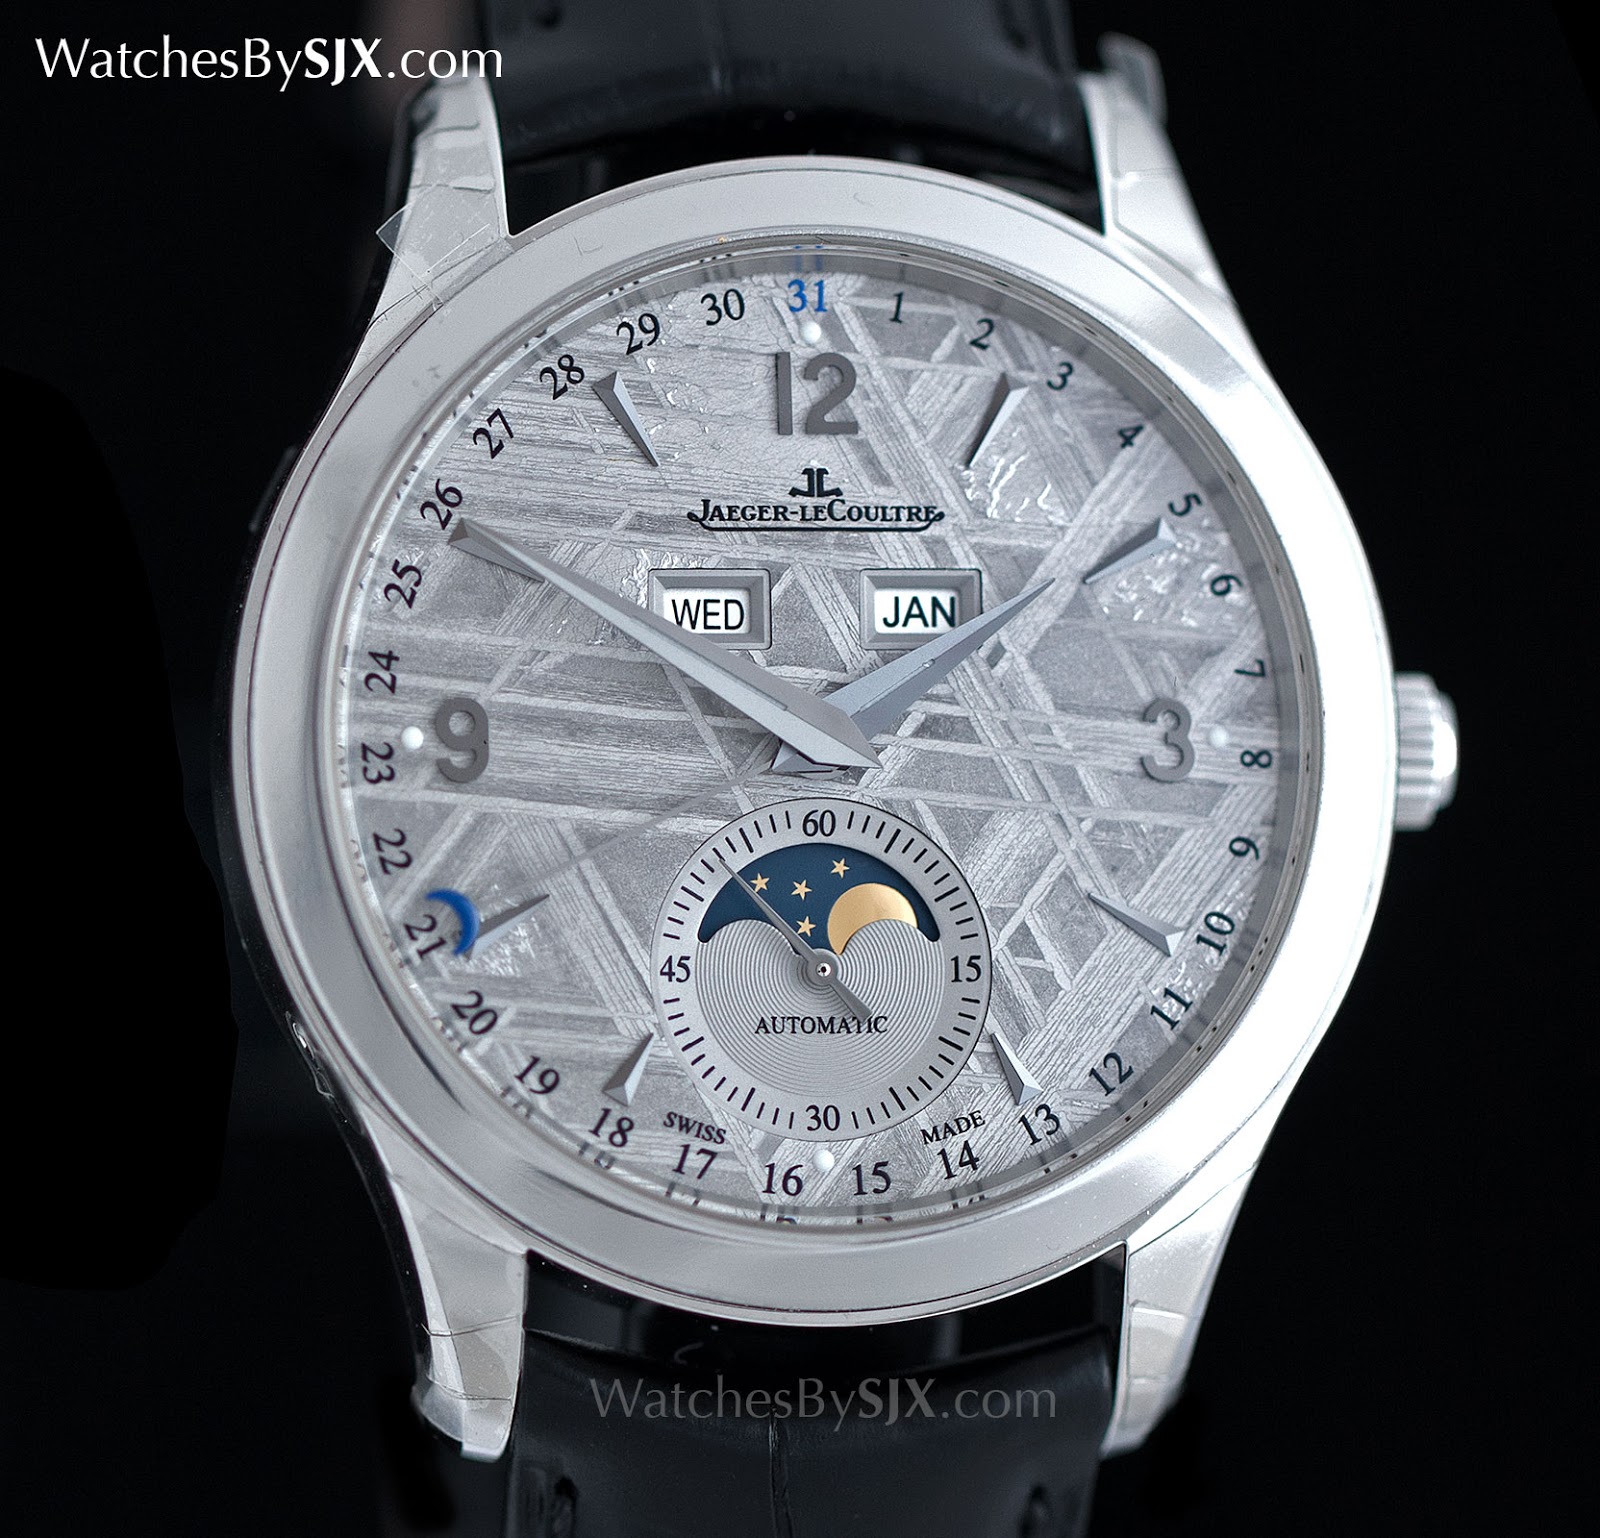 Up Close With The Jaeger-LeCoultre Master Calendar Meteorite ...